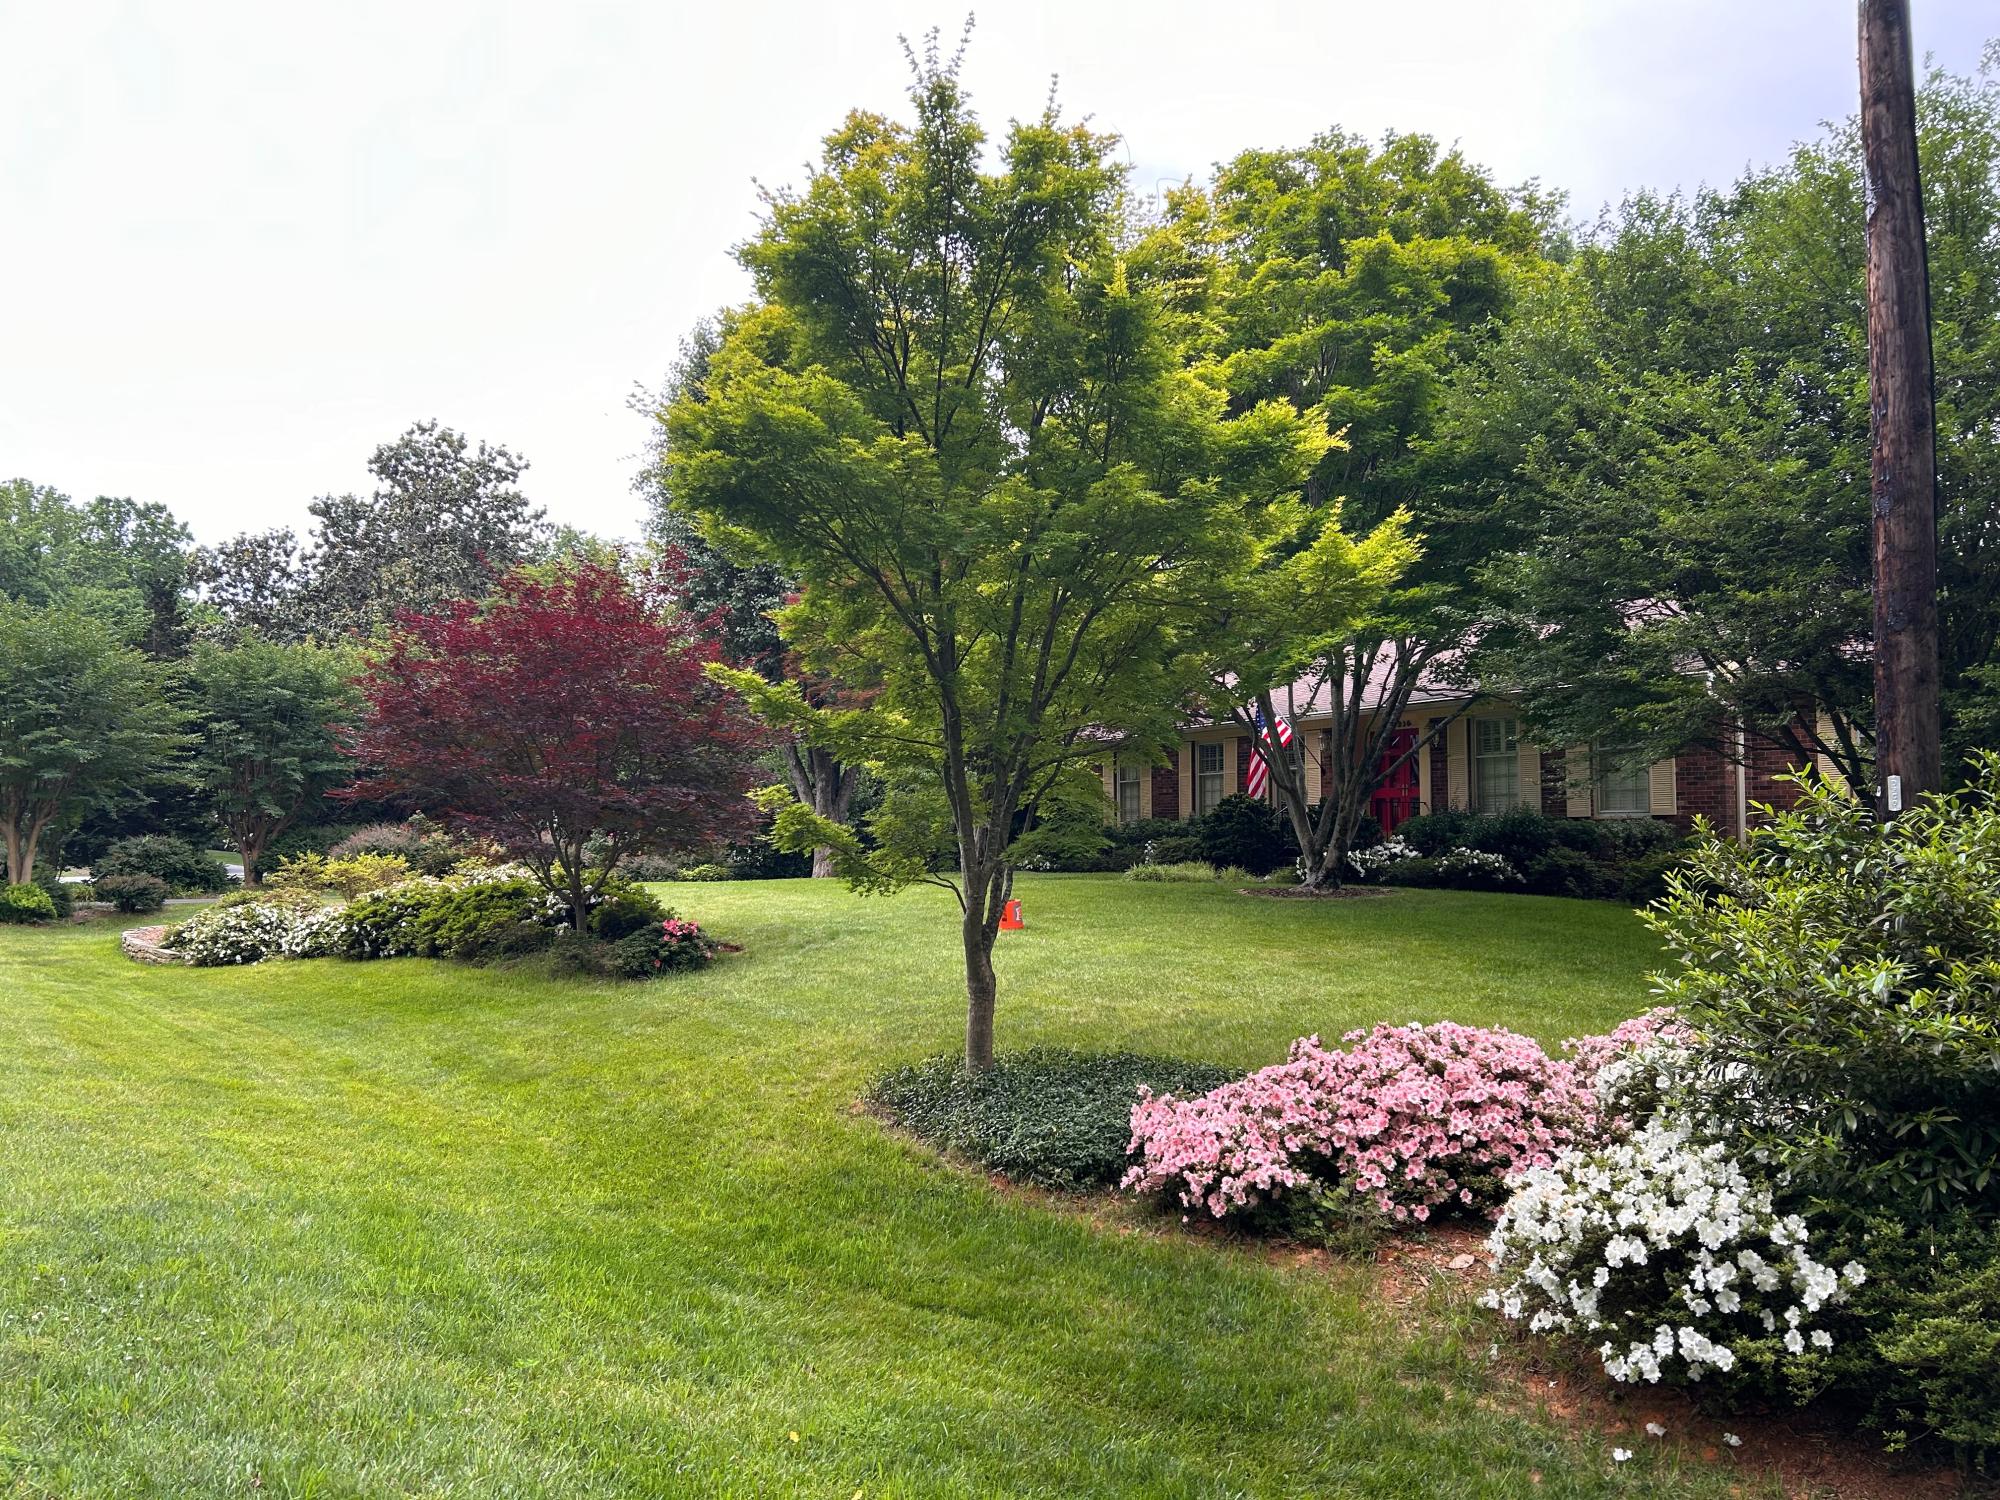 Manicured lawn with colorful flowers and trees